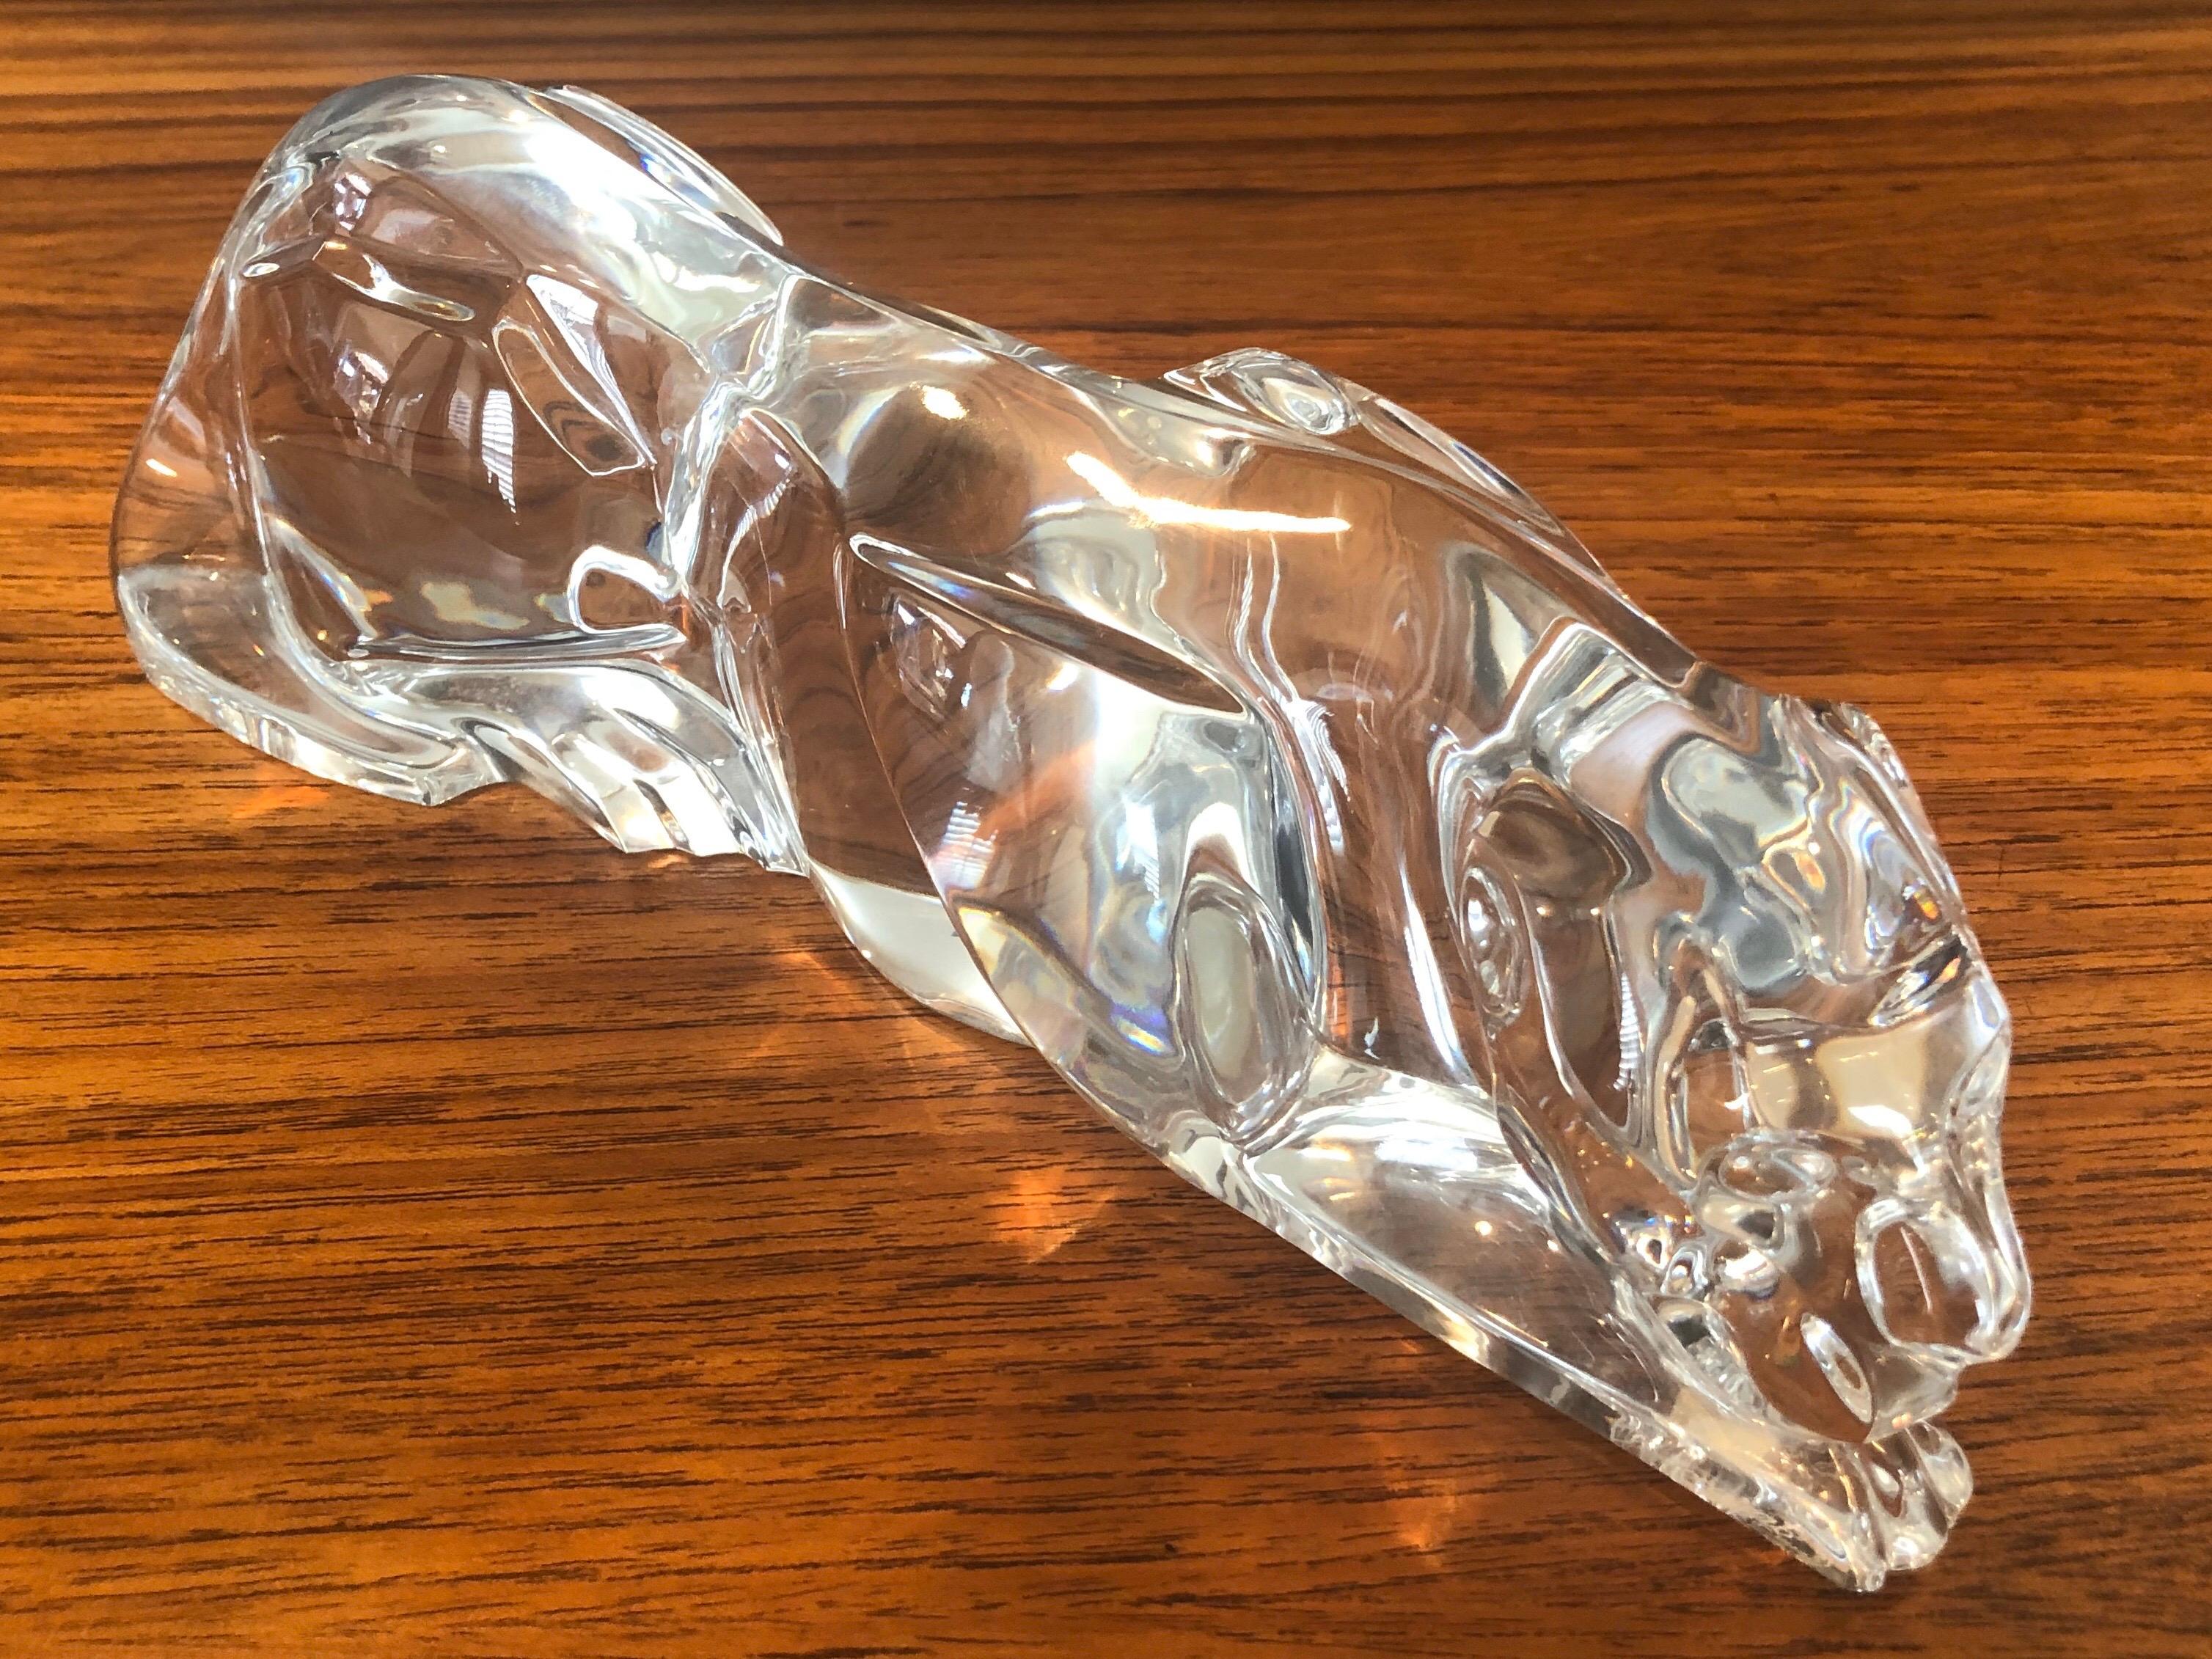 French Stylized Crystal Panther / Jaguar Sculpture by Baccarat